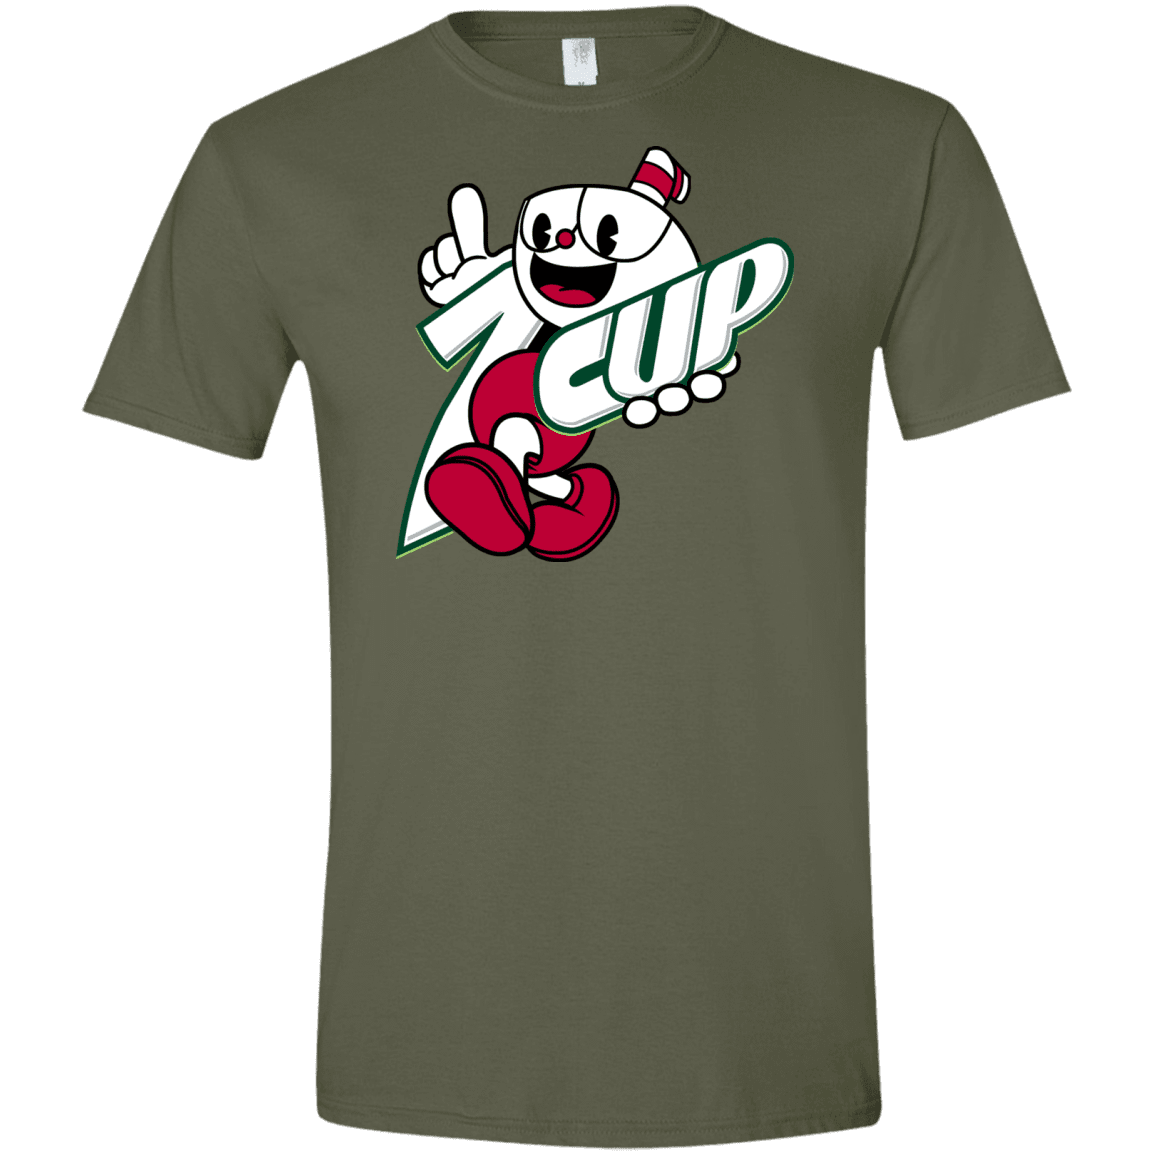 T-Shirts Military Green / S 1cup Men's Semi-Fitted Softstyle